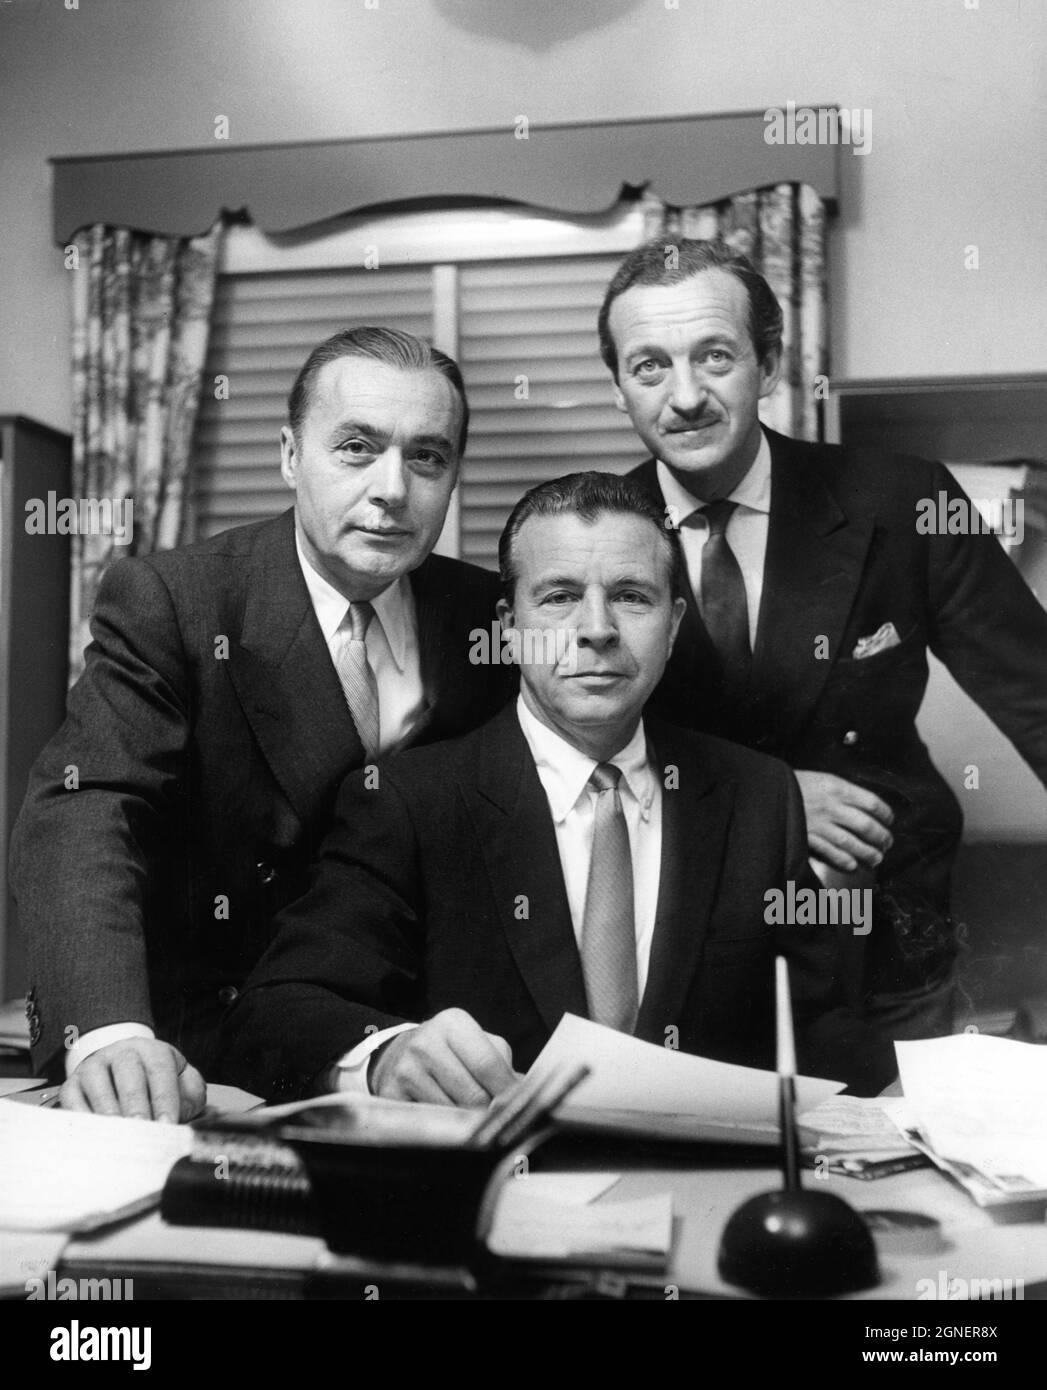 CHARLES BOYER DICK POWELL and DAVID NIVEN 1955 publicity Portrait as Directors of FOUR STAR PRODUCTIONS (later FOUR STAR TELEVISION ) the prolific Television Production Company they founded in 1952 Stock Photo